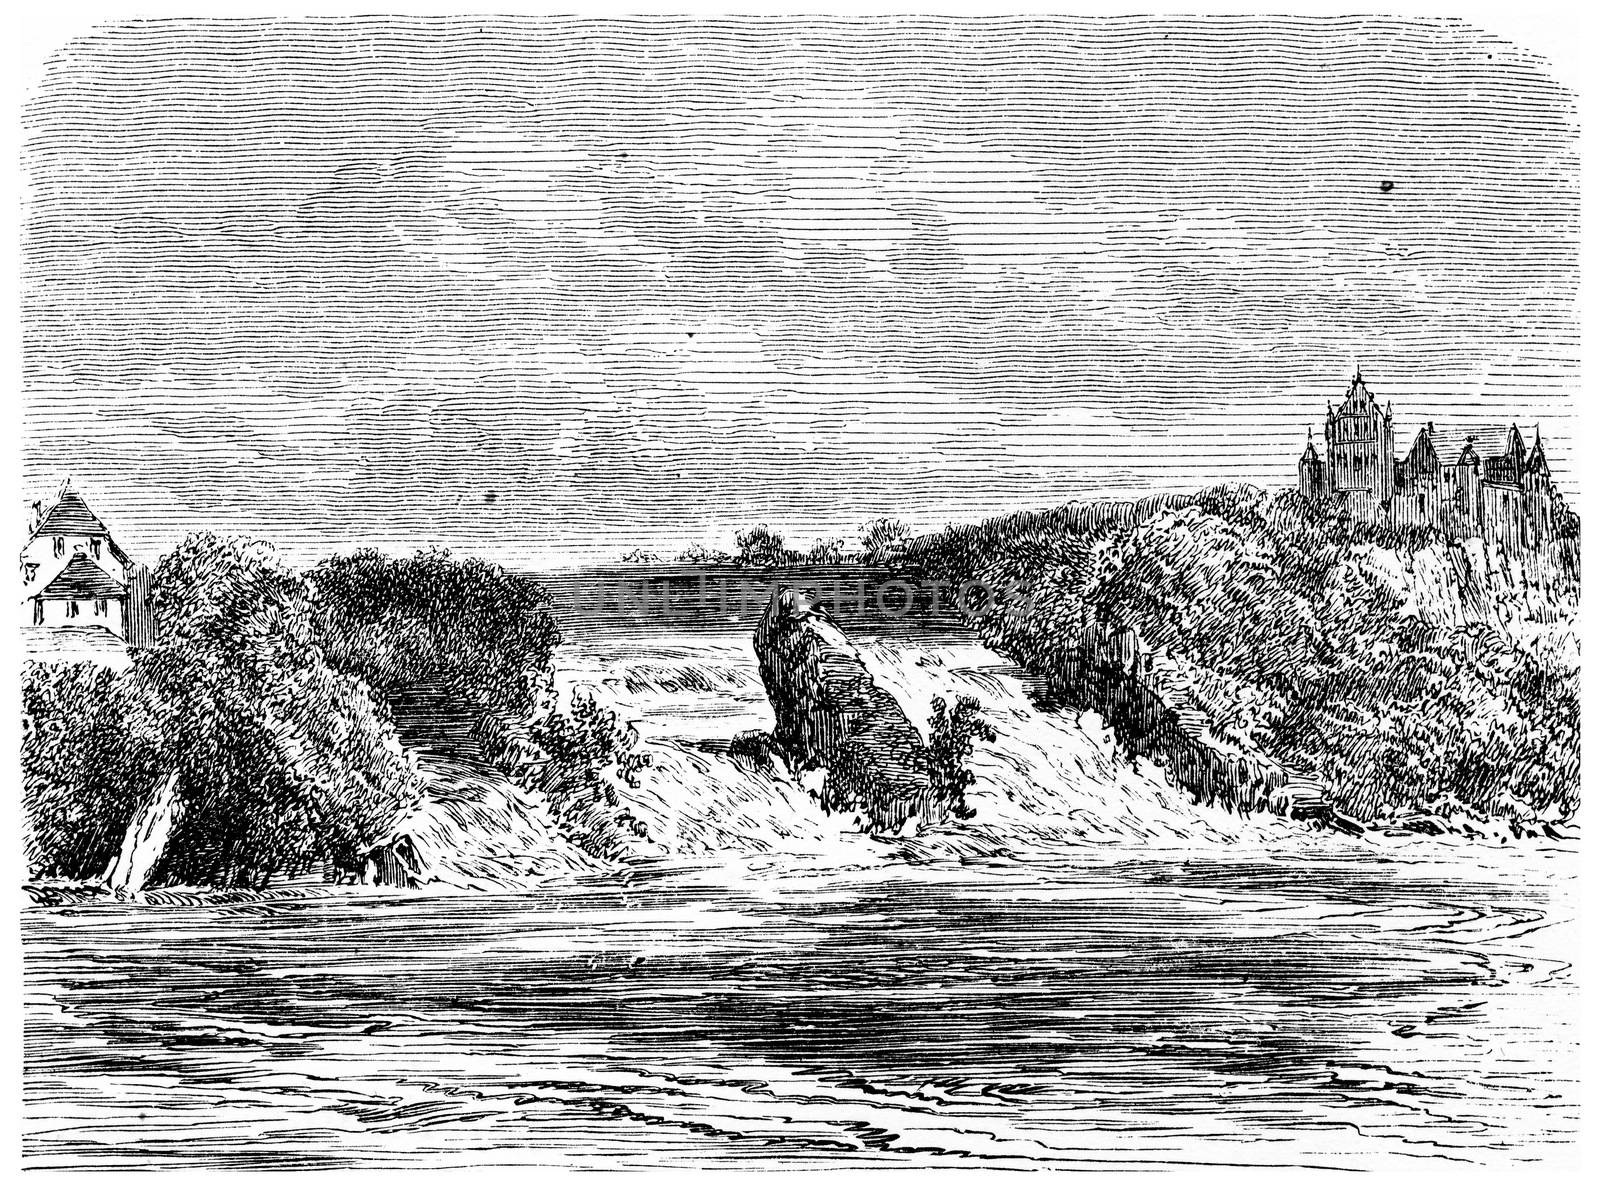 Rhine Fall in Schaffhausen, vintage engraved illustration. From Chemin des Ecoliers, 1861.
